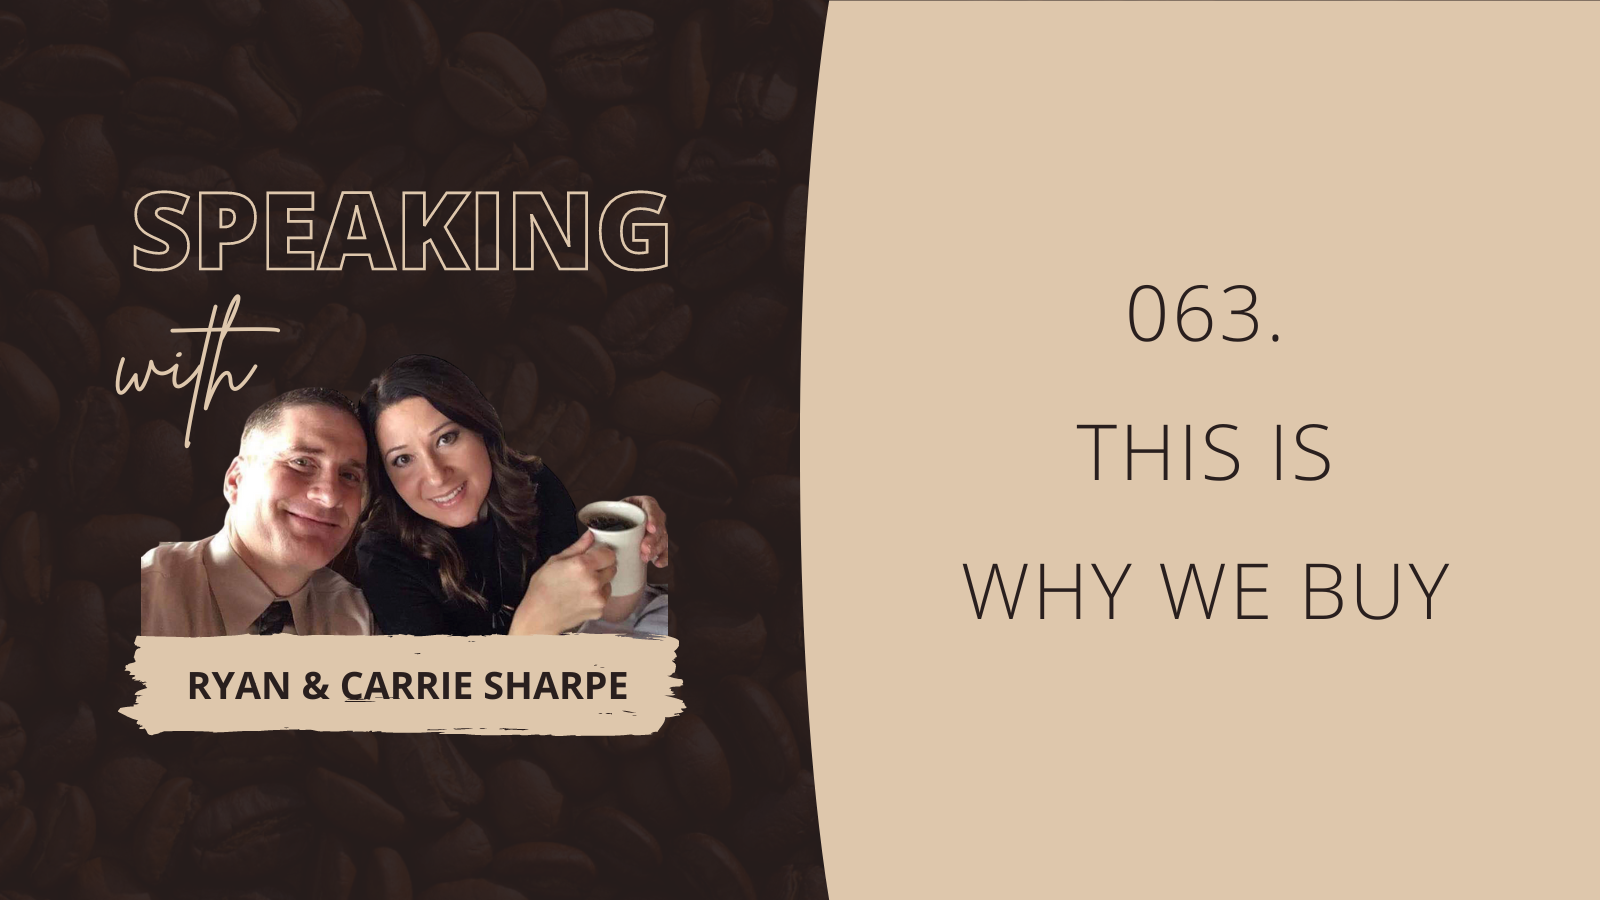 063. This Is Why We Buy | Speaking with Ryan & Carrie Sharpe podcast